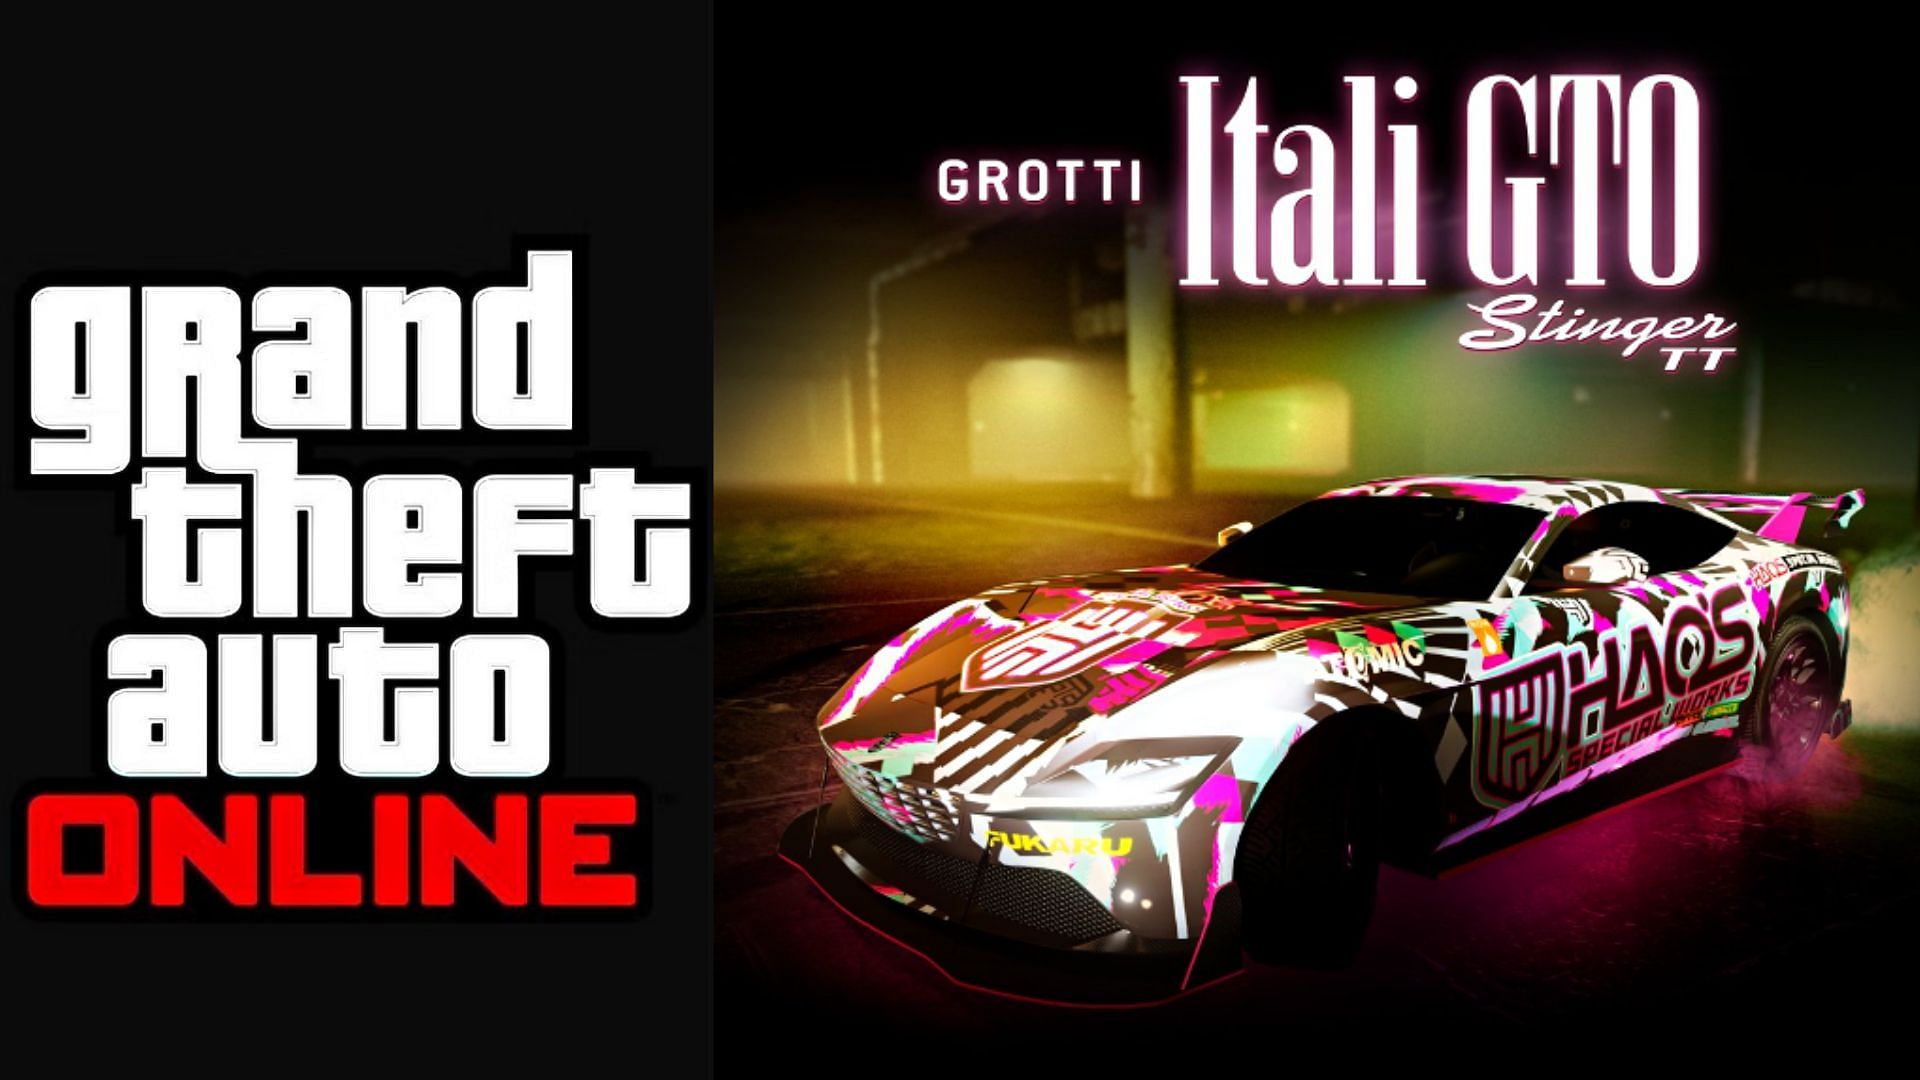 The Itali GTO Stinger TT is one of the new cars in GTA Online (Image via Rockstar Games)